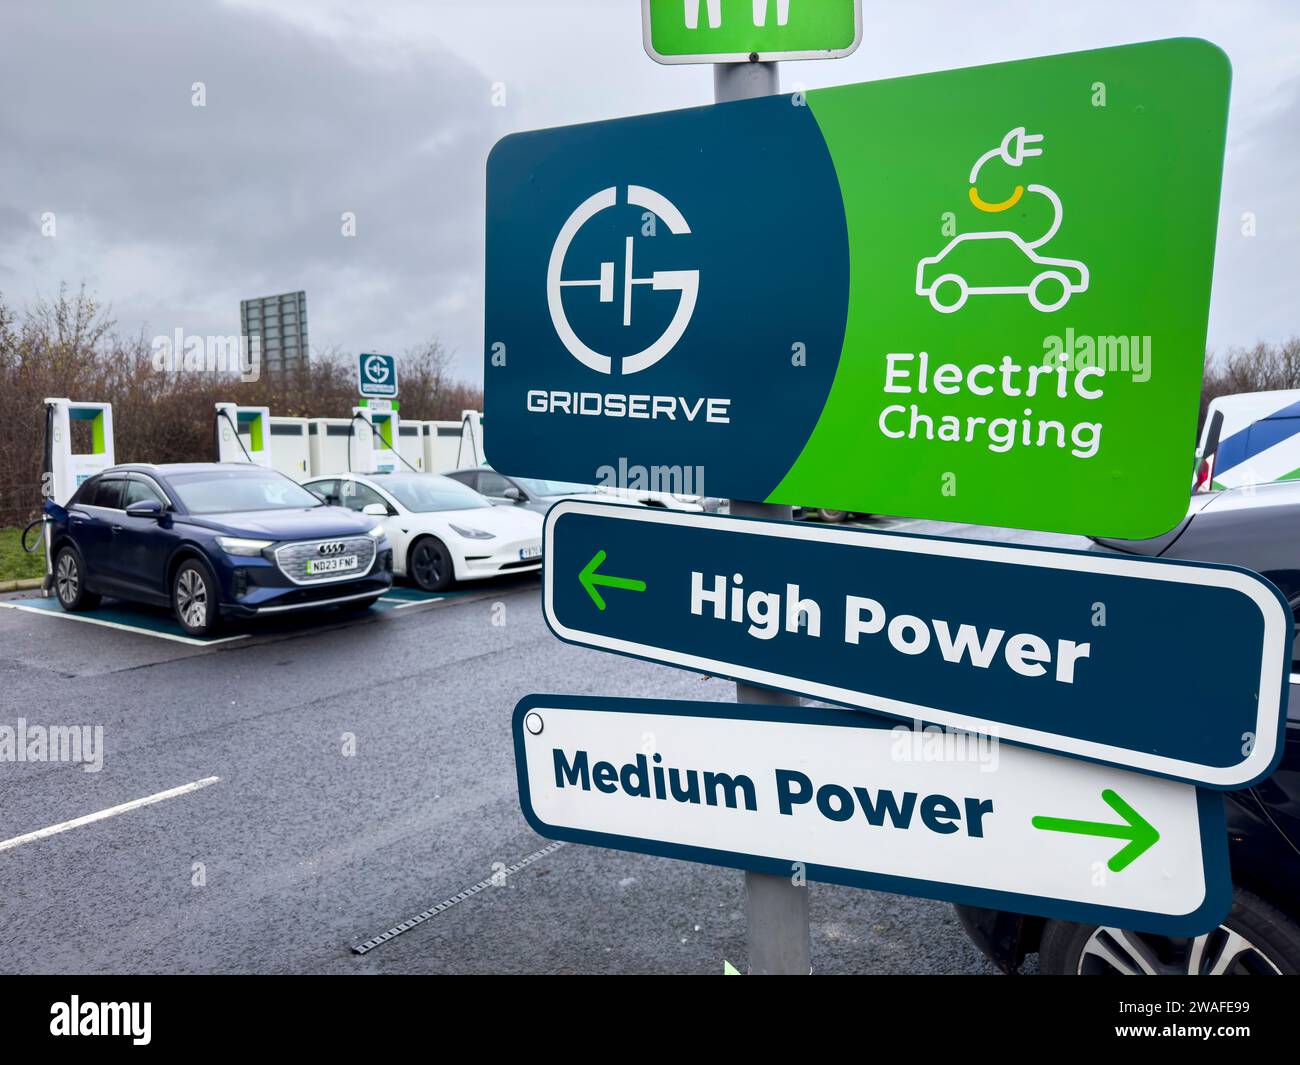 MOTO Services, Wetherby, A1, Yorkshire, England, UK.  Images of the EV electric vehicle charging points by Gridserve at the Wetherby MOTO services on Stock Photo